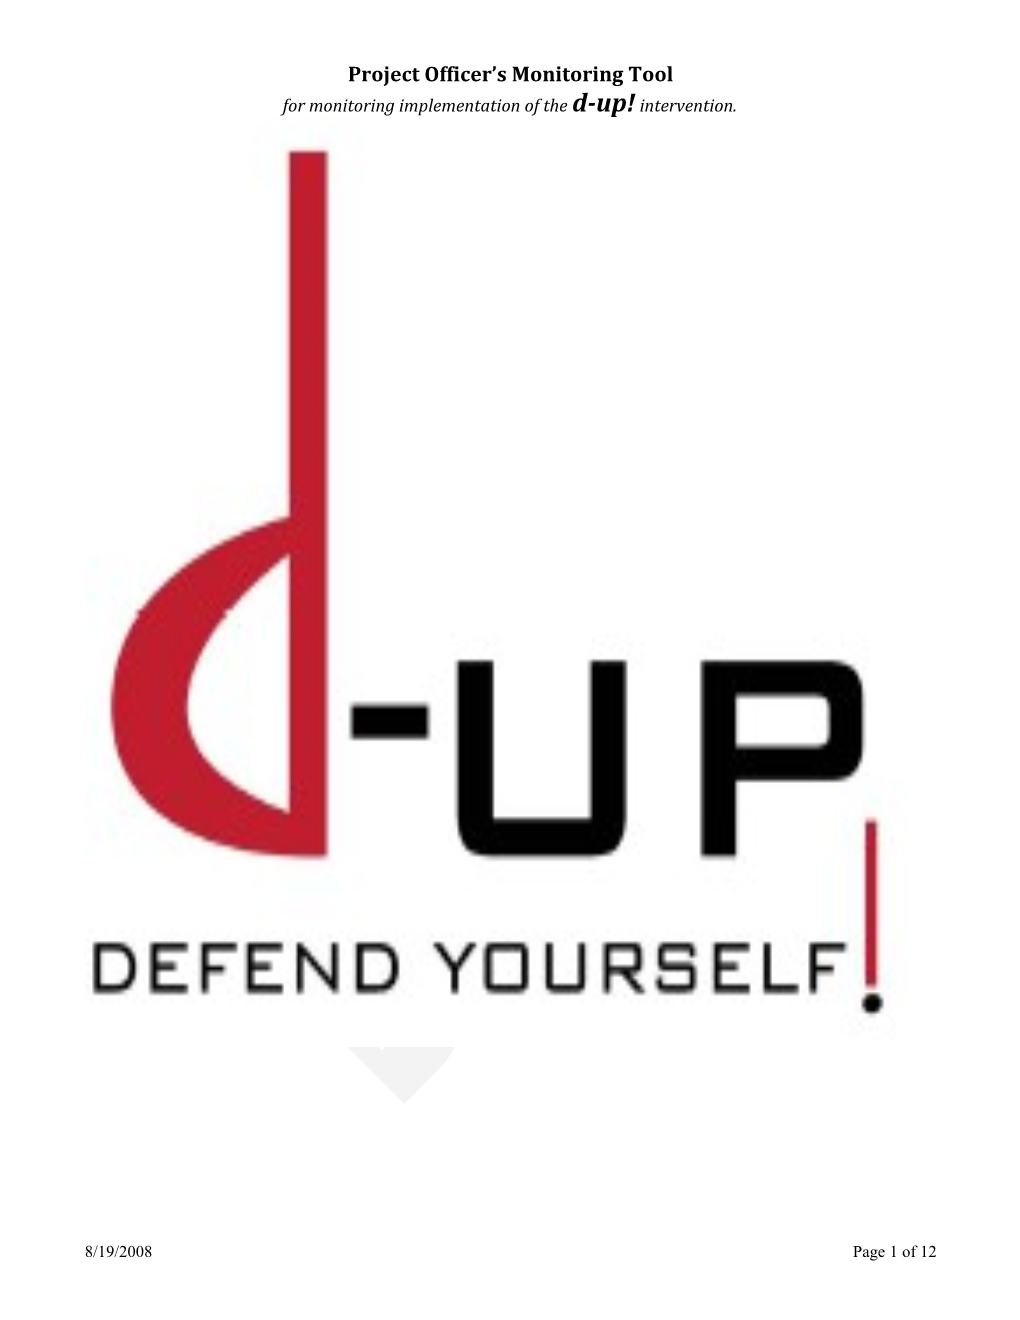 For Monitoring Implementation of the D-Up! Intervention